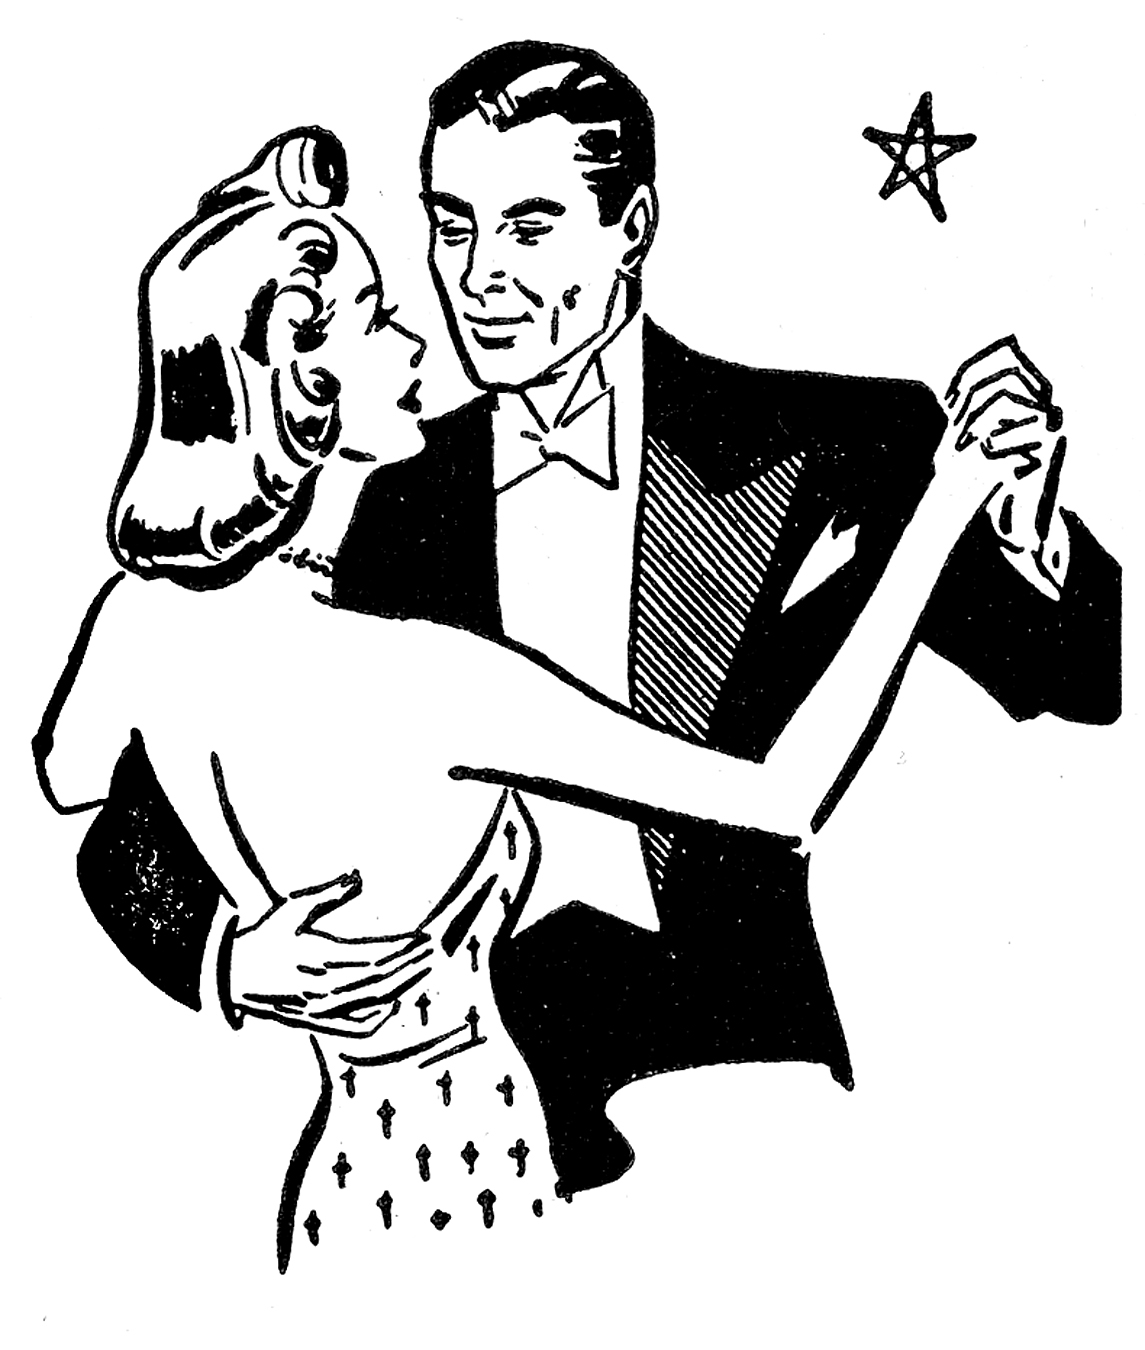 free dance clipart black and white - photo #46